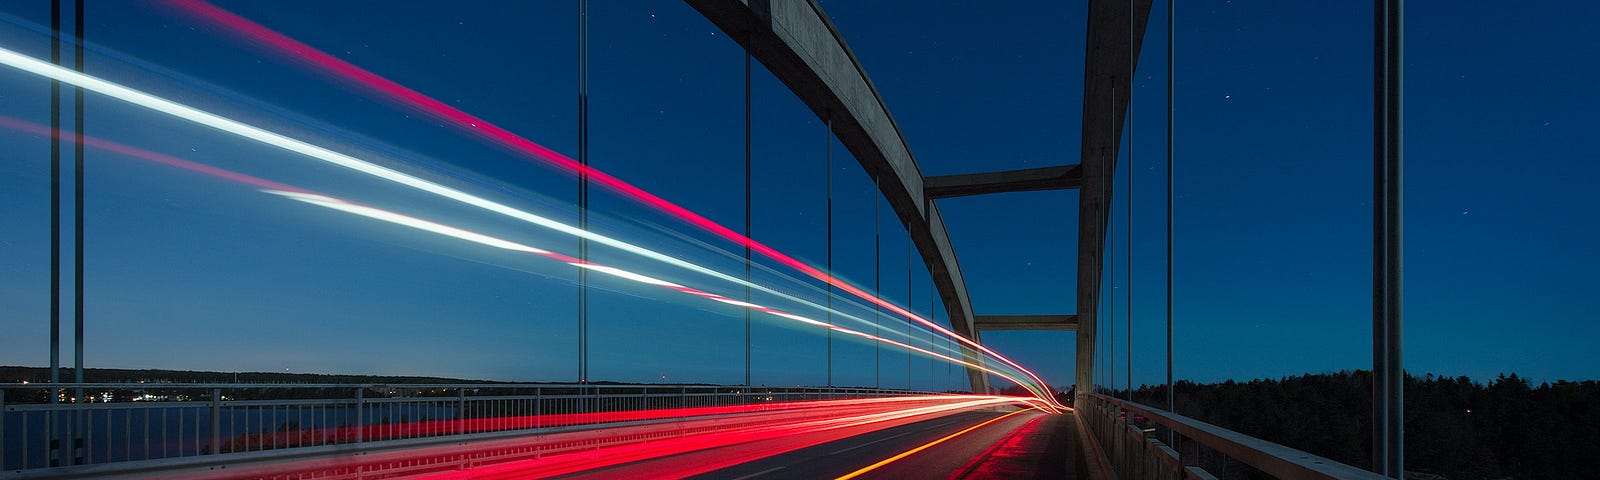 Bright lines of light accelerate across a bridge at night.